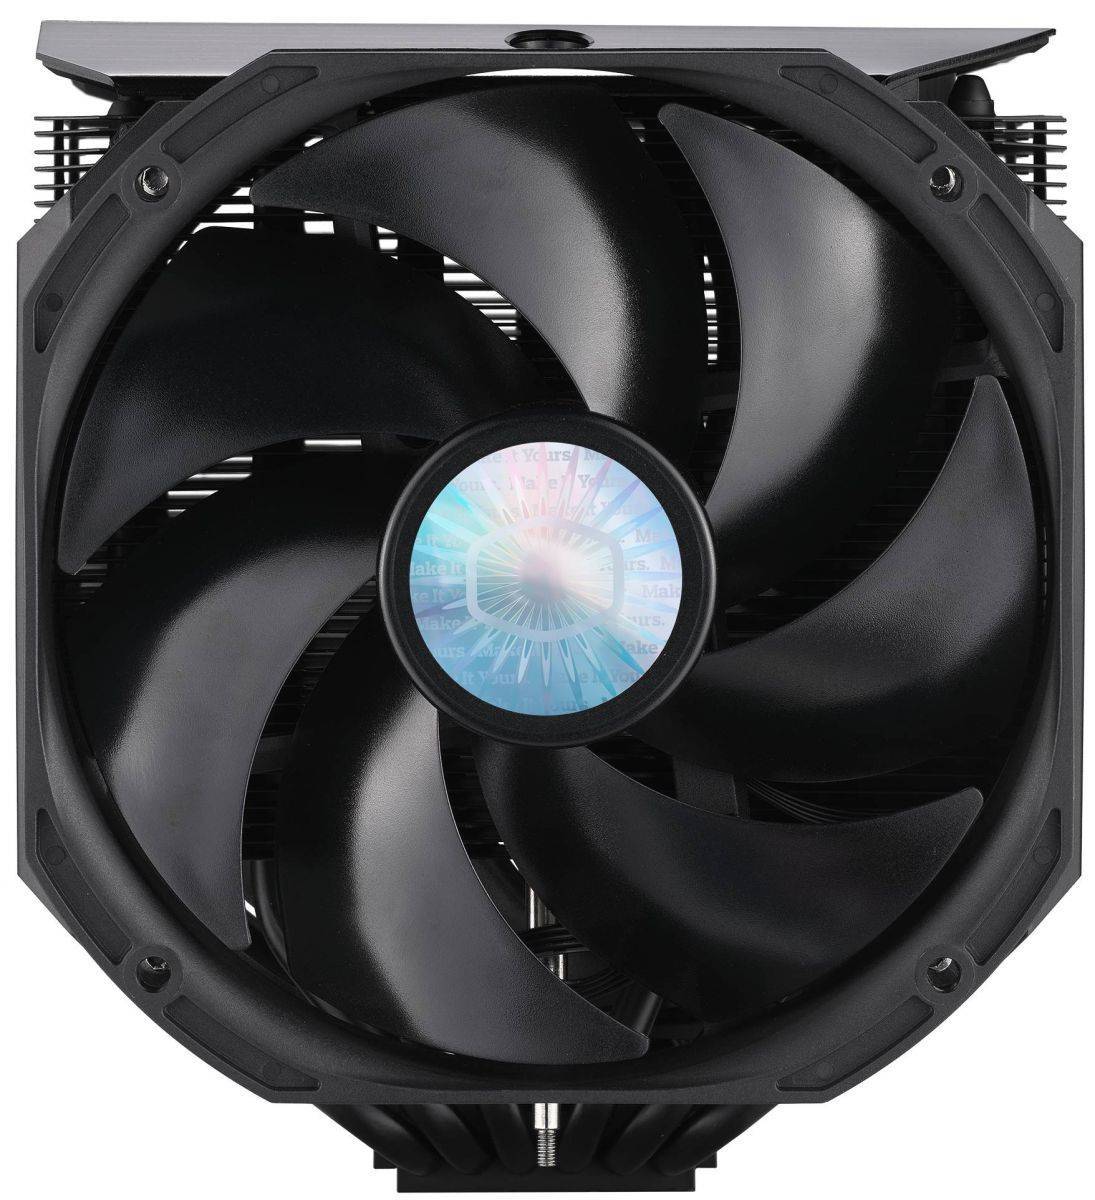 Cooler Master CPU Cooler MasterAir MA624 Stealth, 250W, Full Socket Support